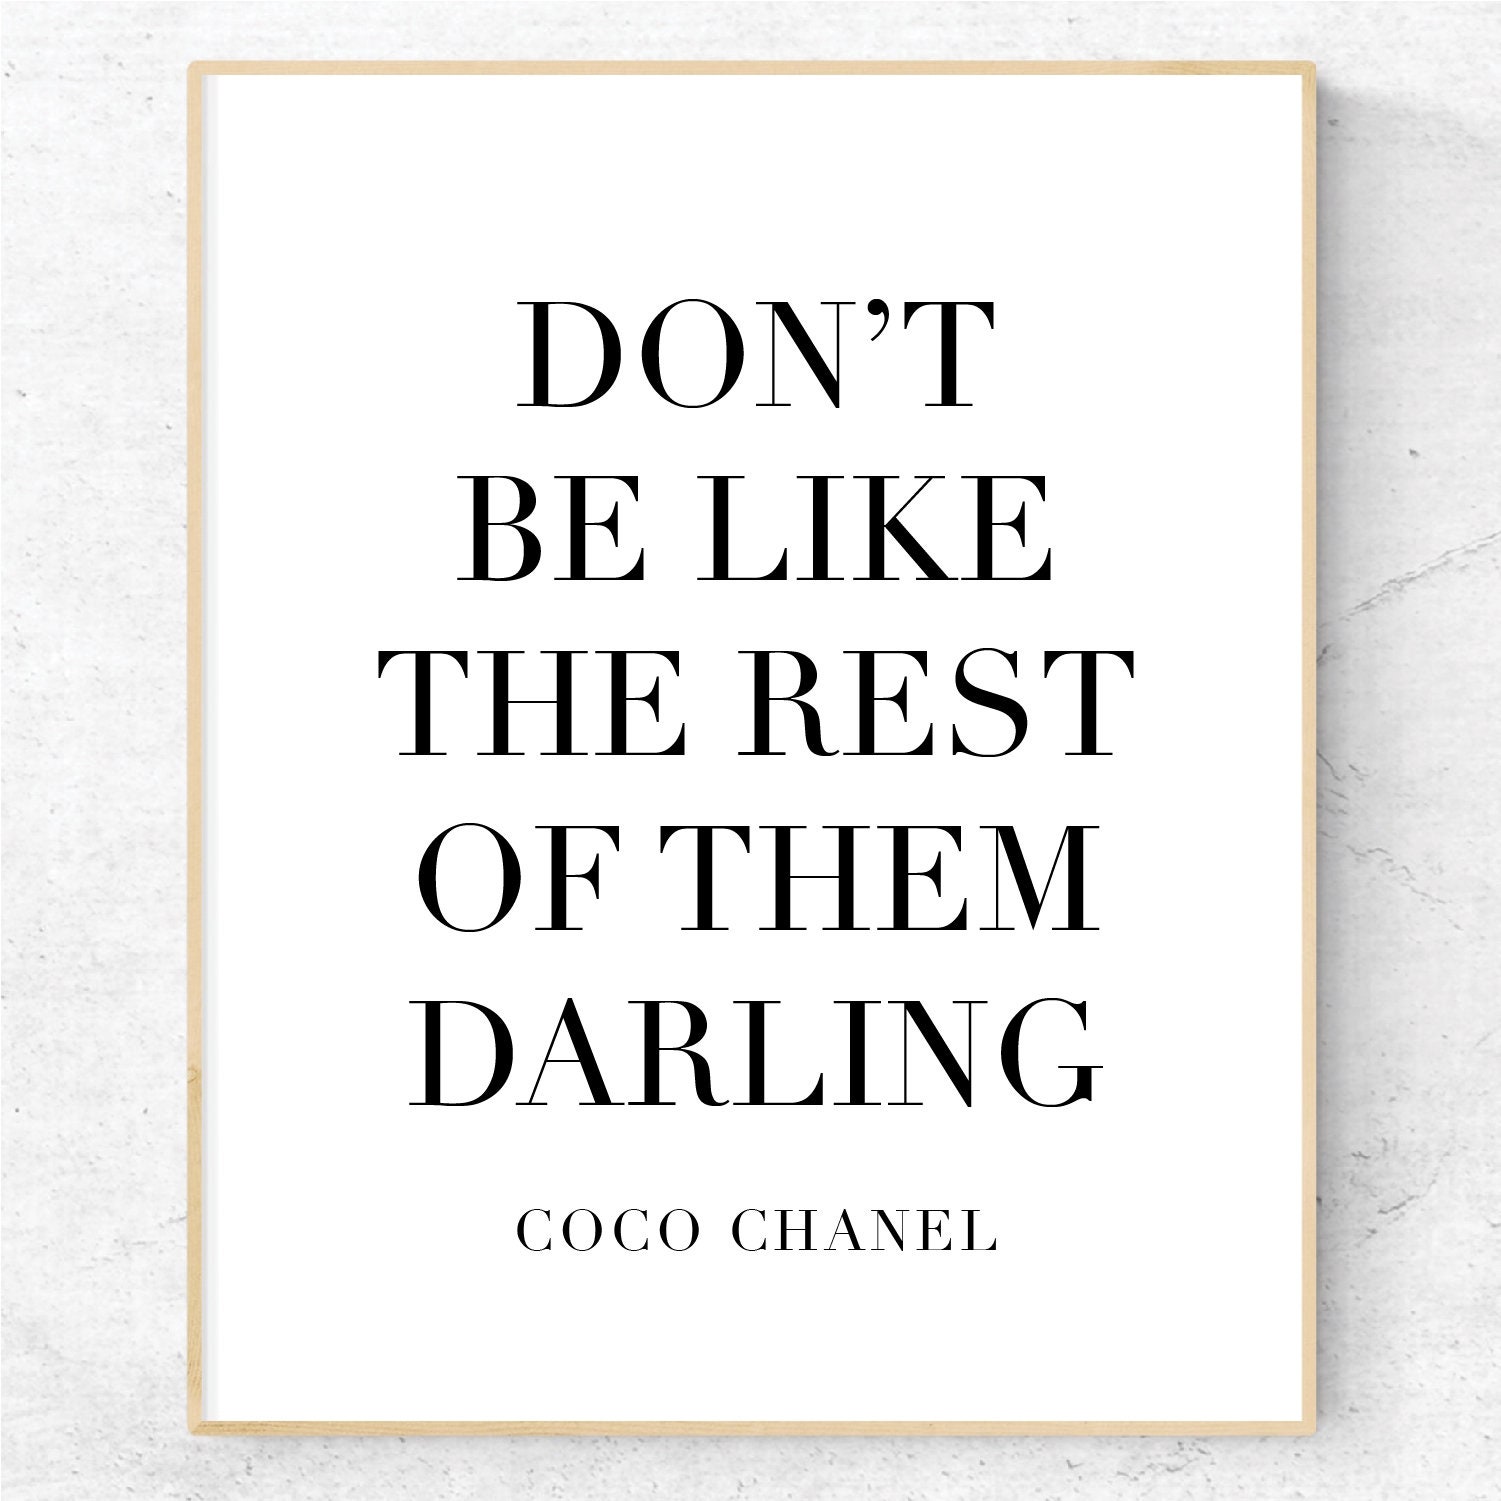 New Printable: Don't Be Like The Rest of Them, Darling